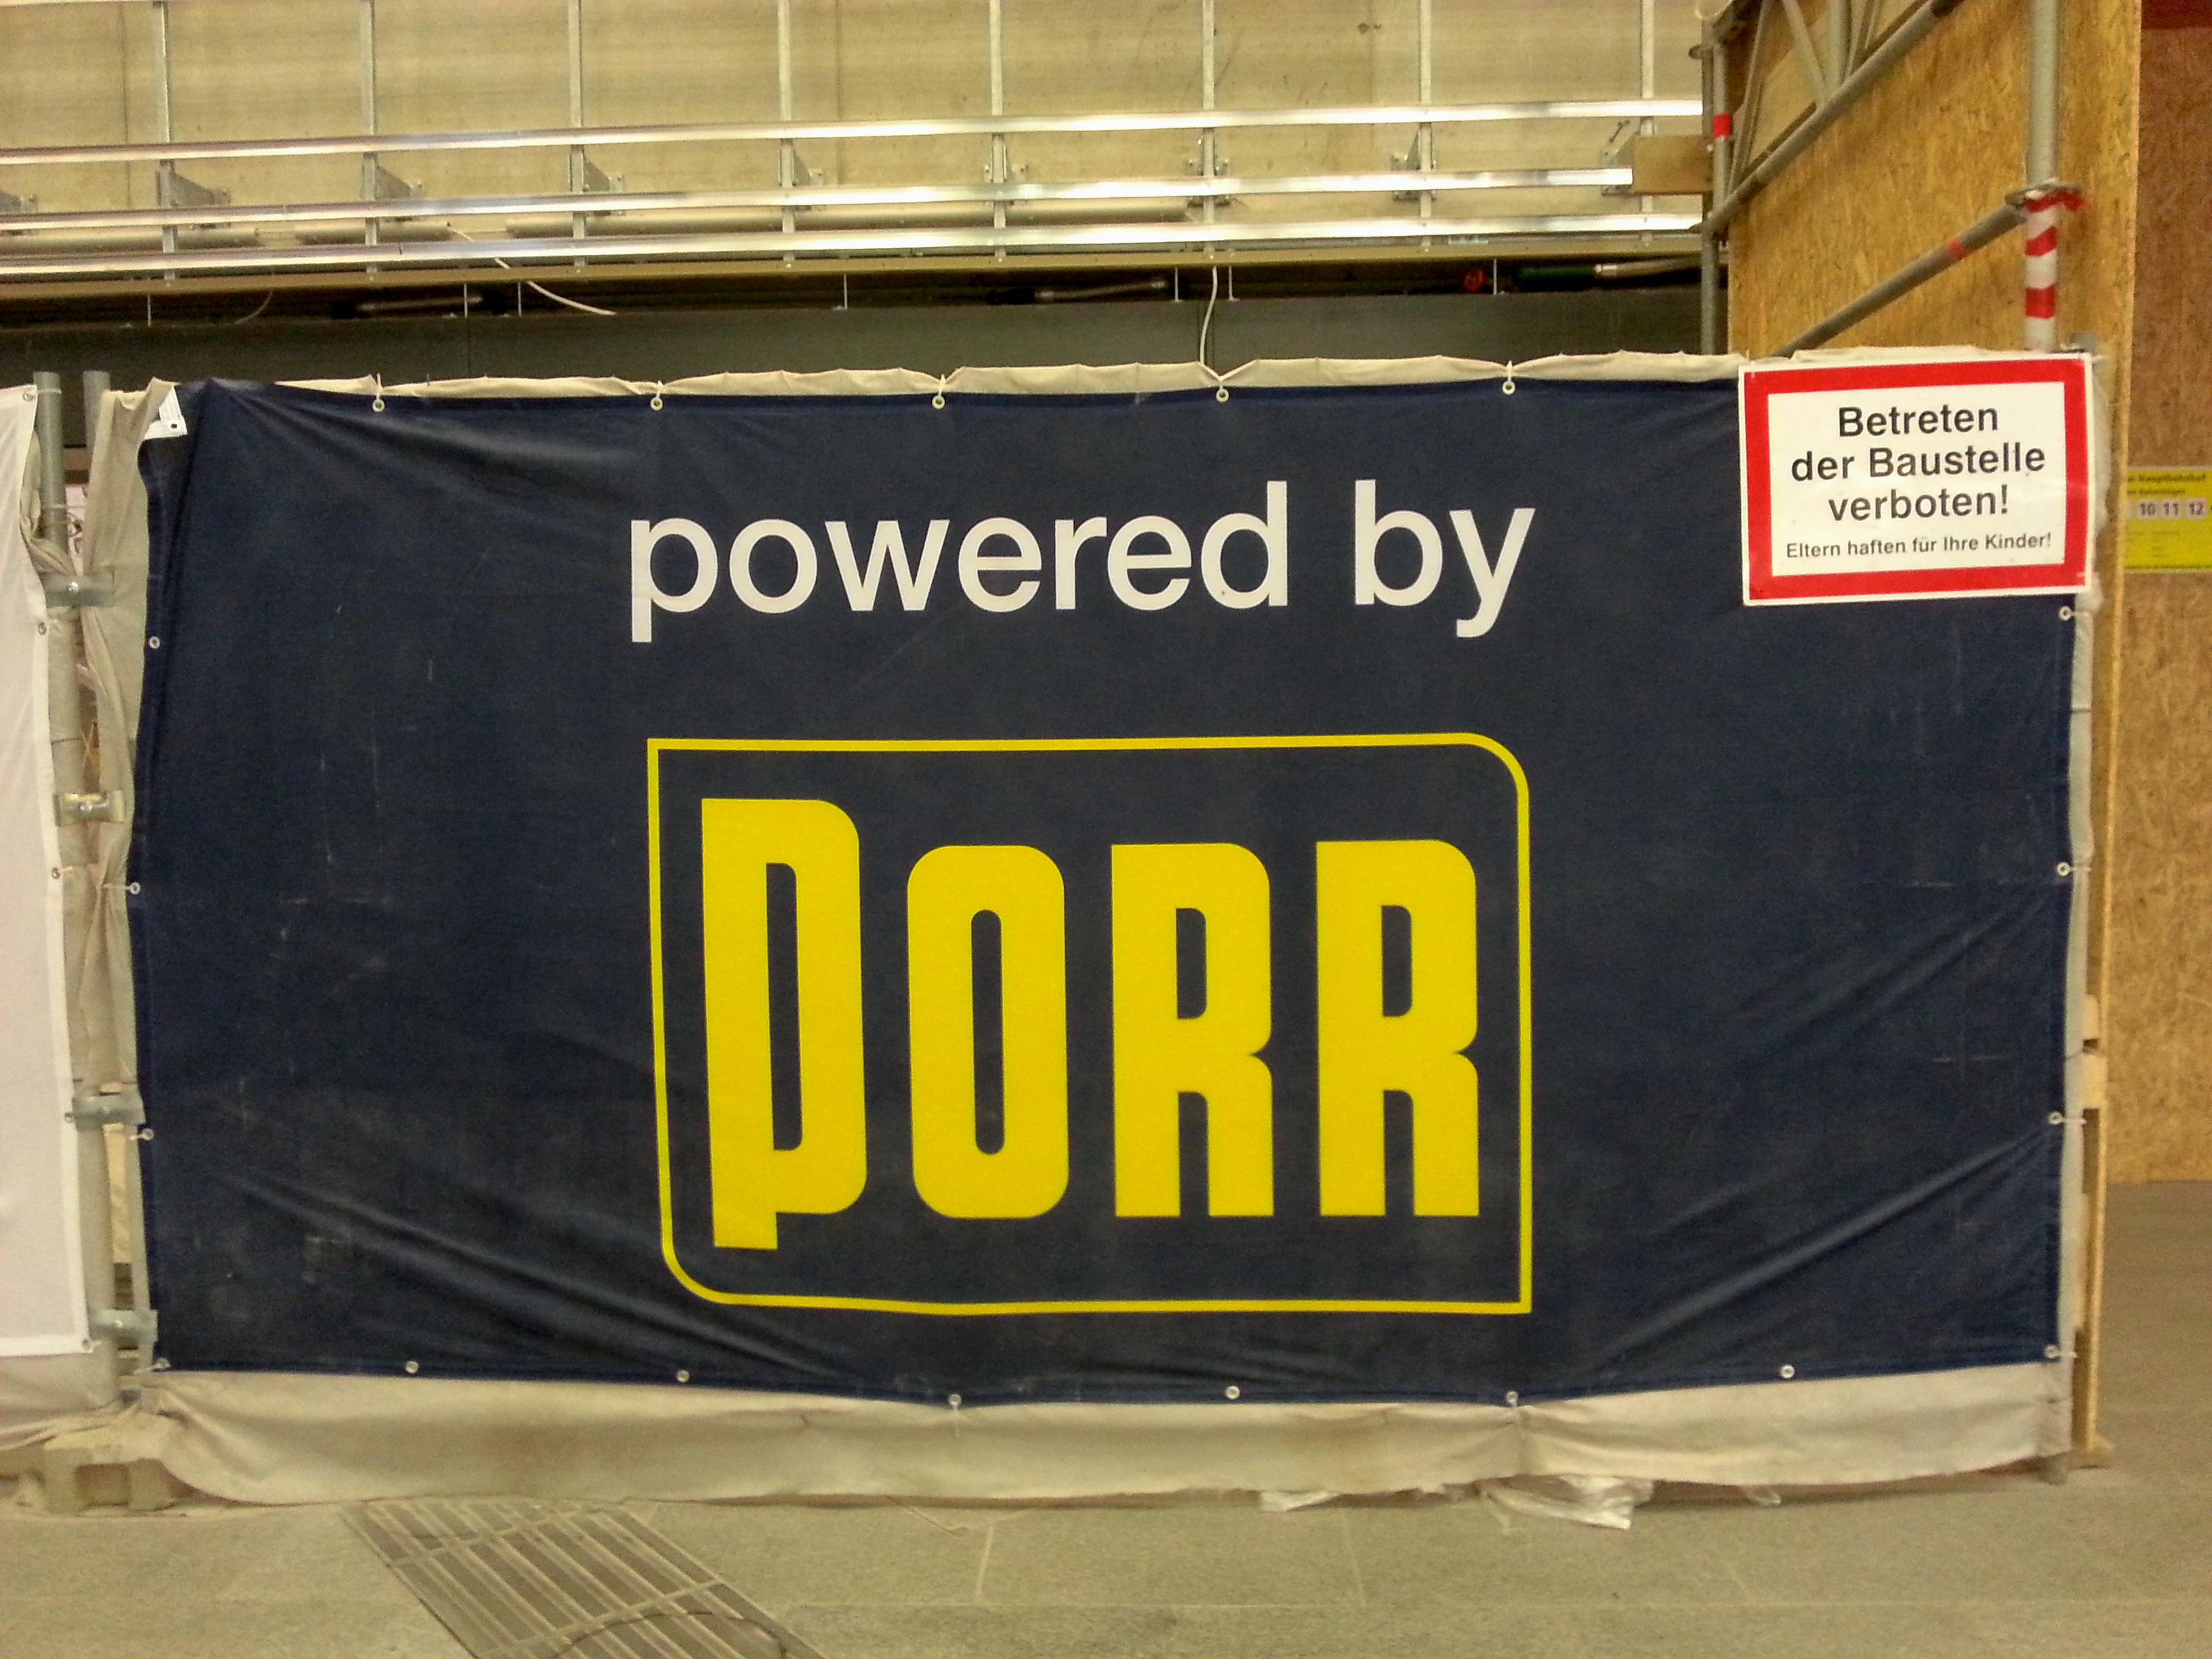 Powered by Porr